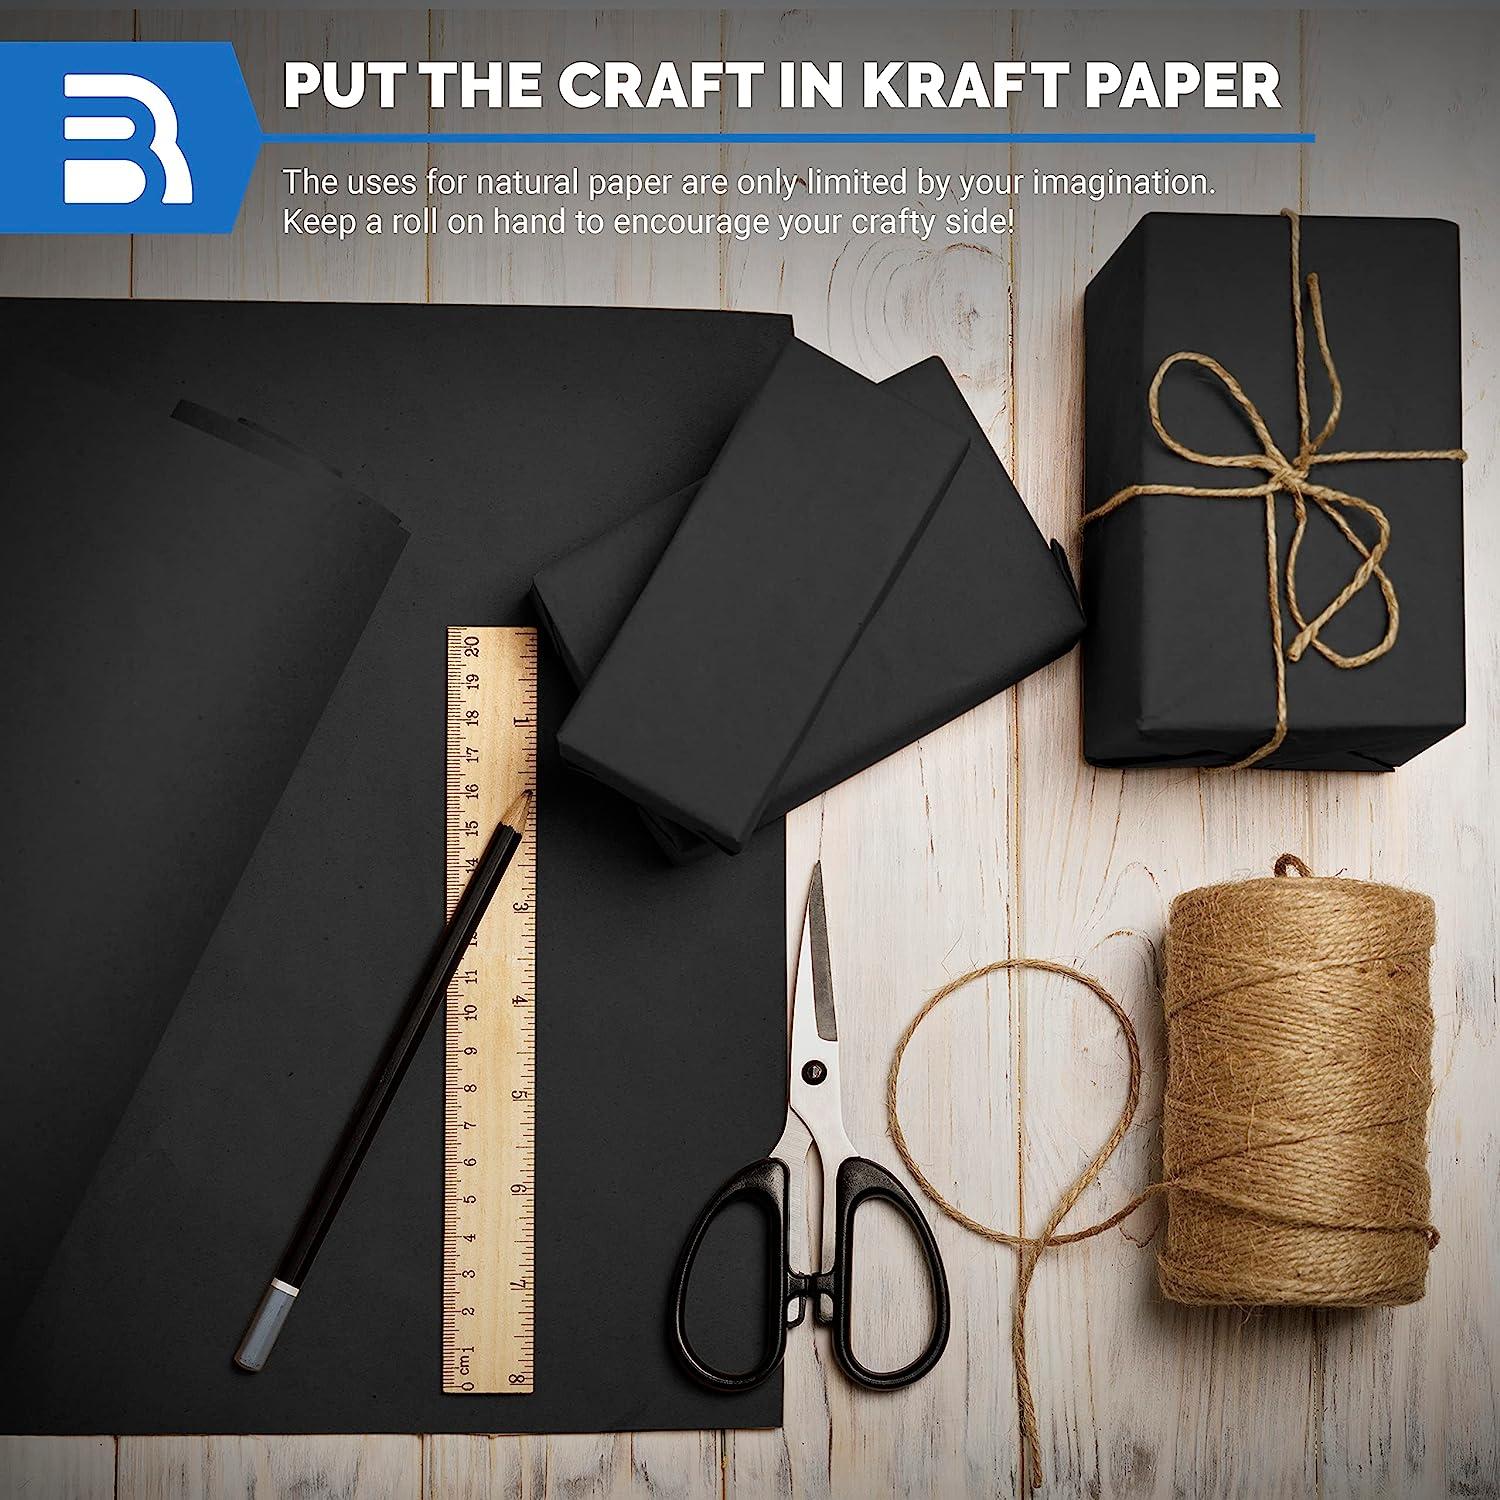 Black Kraft Arts and Crafts Paper Roll - 18 inches by 100 Feet (1200 Inch)  - Ideal for Paints, Wall Art, Easel Paper, Fadeless Bulletin Board Paper,  Gift Wrapping Paper and Kids Crafts - Made in USA